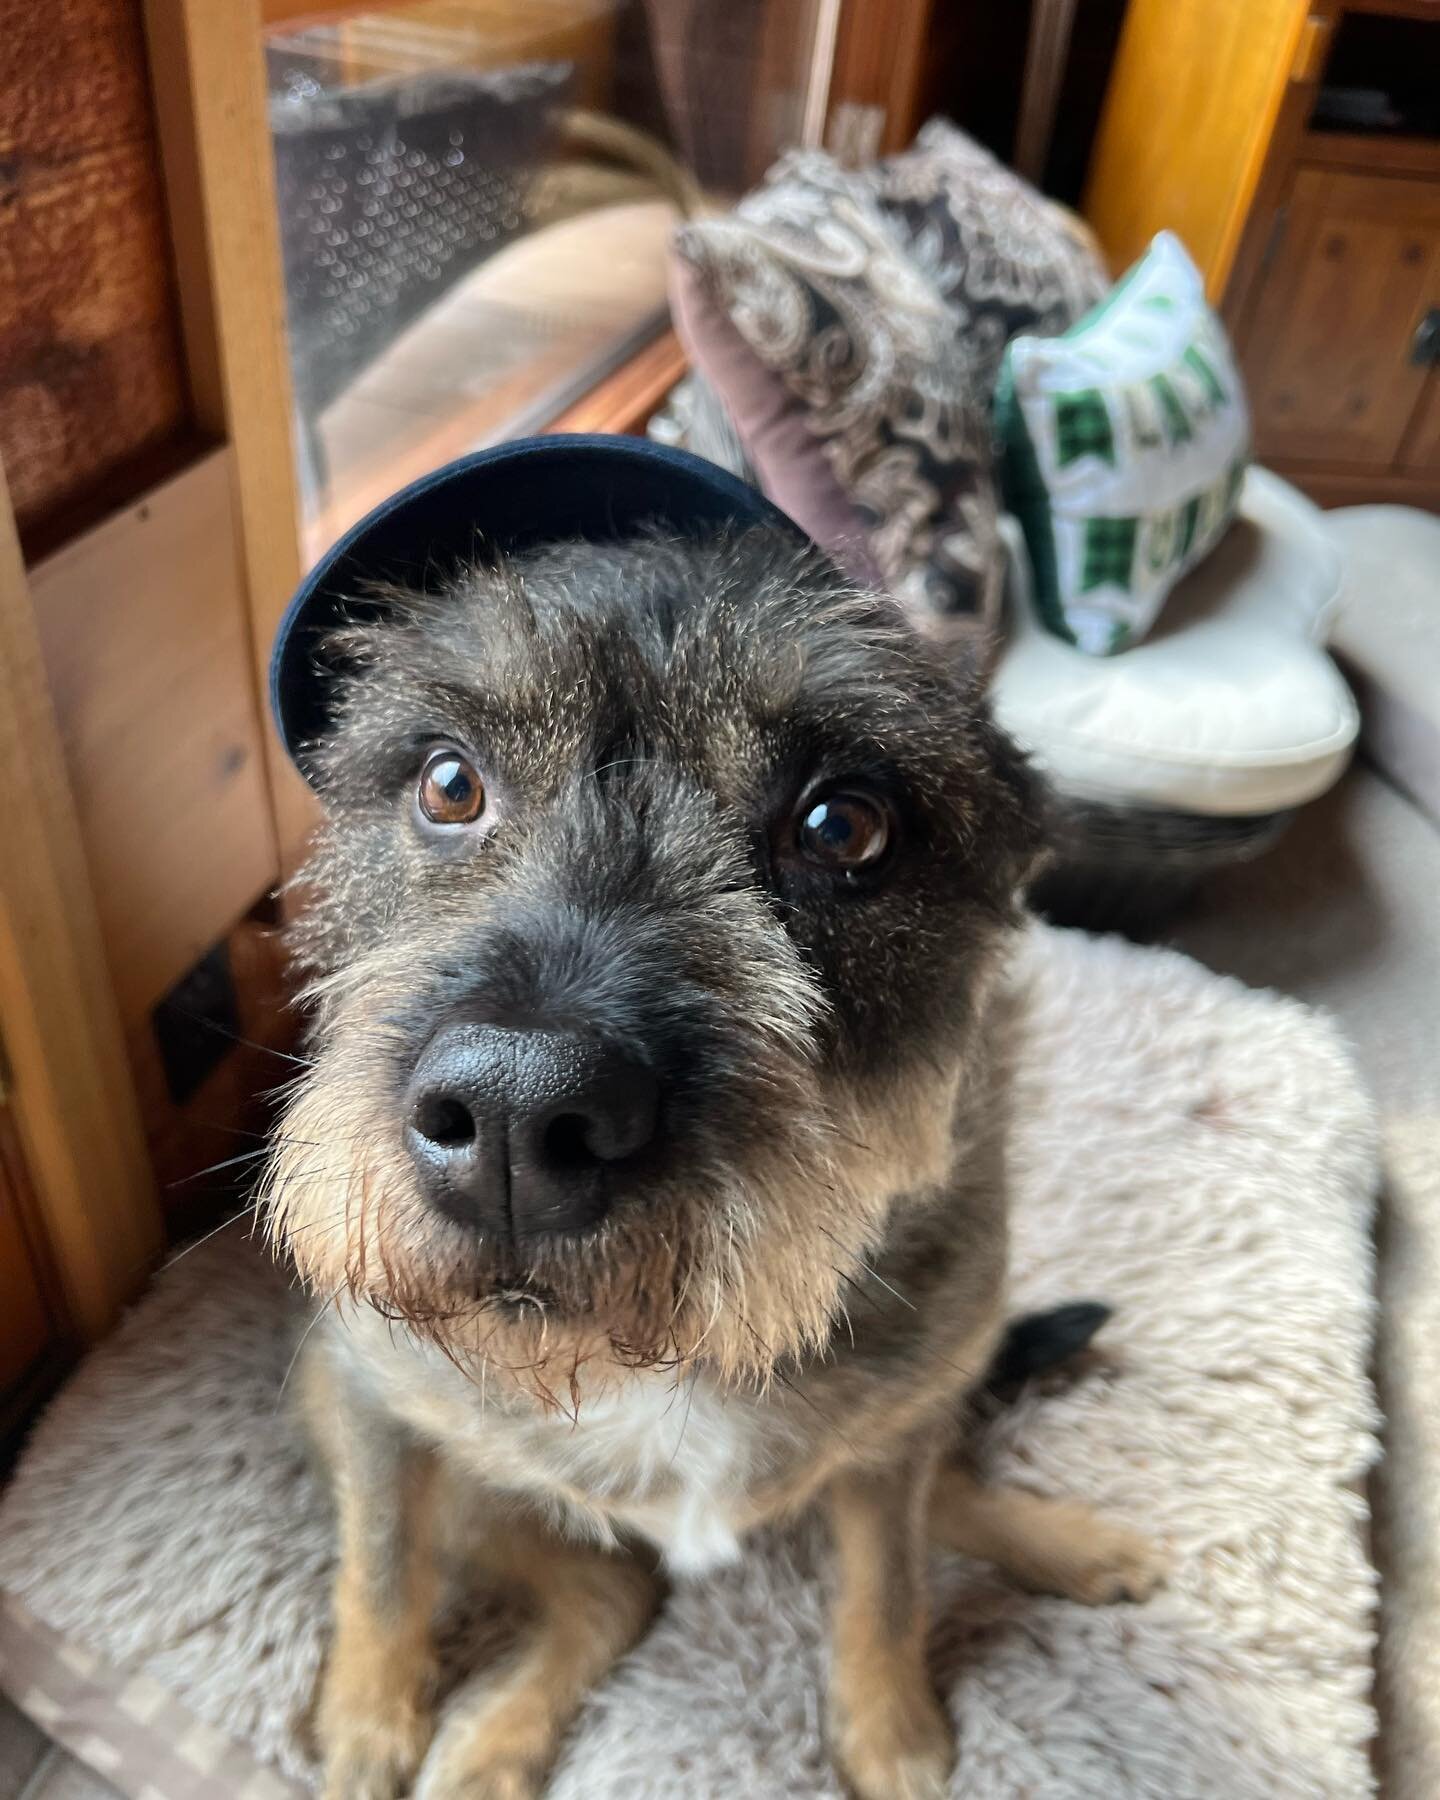 Go like our ✨ giveaway ✨ post for a chance to win a BJ Queen hat and t-shirt! Thank you to our model Naldo for showing off our gear! ⚙️ 🧰 🔧 🪛 

#dogs #advertising #adirondacks #eaglebay #inletny #moutains #hvac #tech #plumbing #septic #waterfiltra